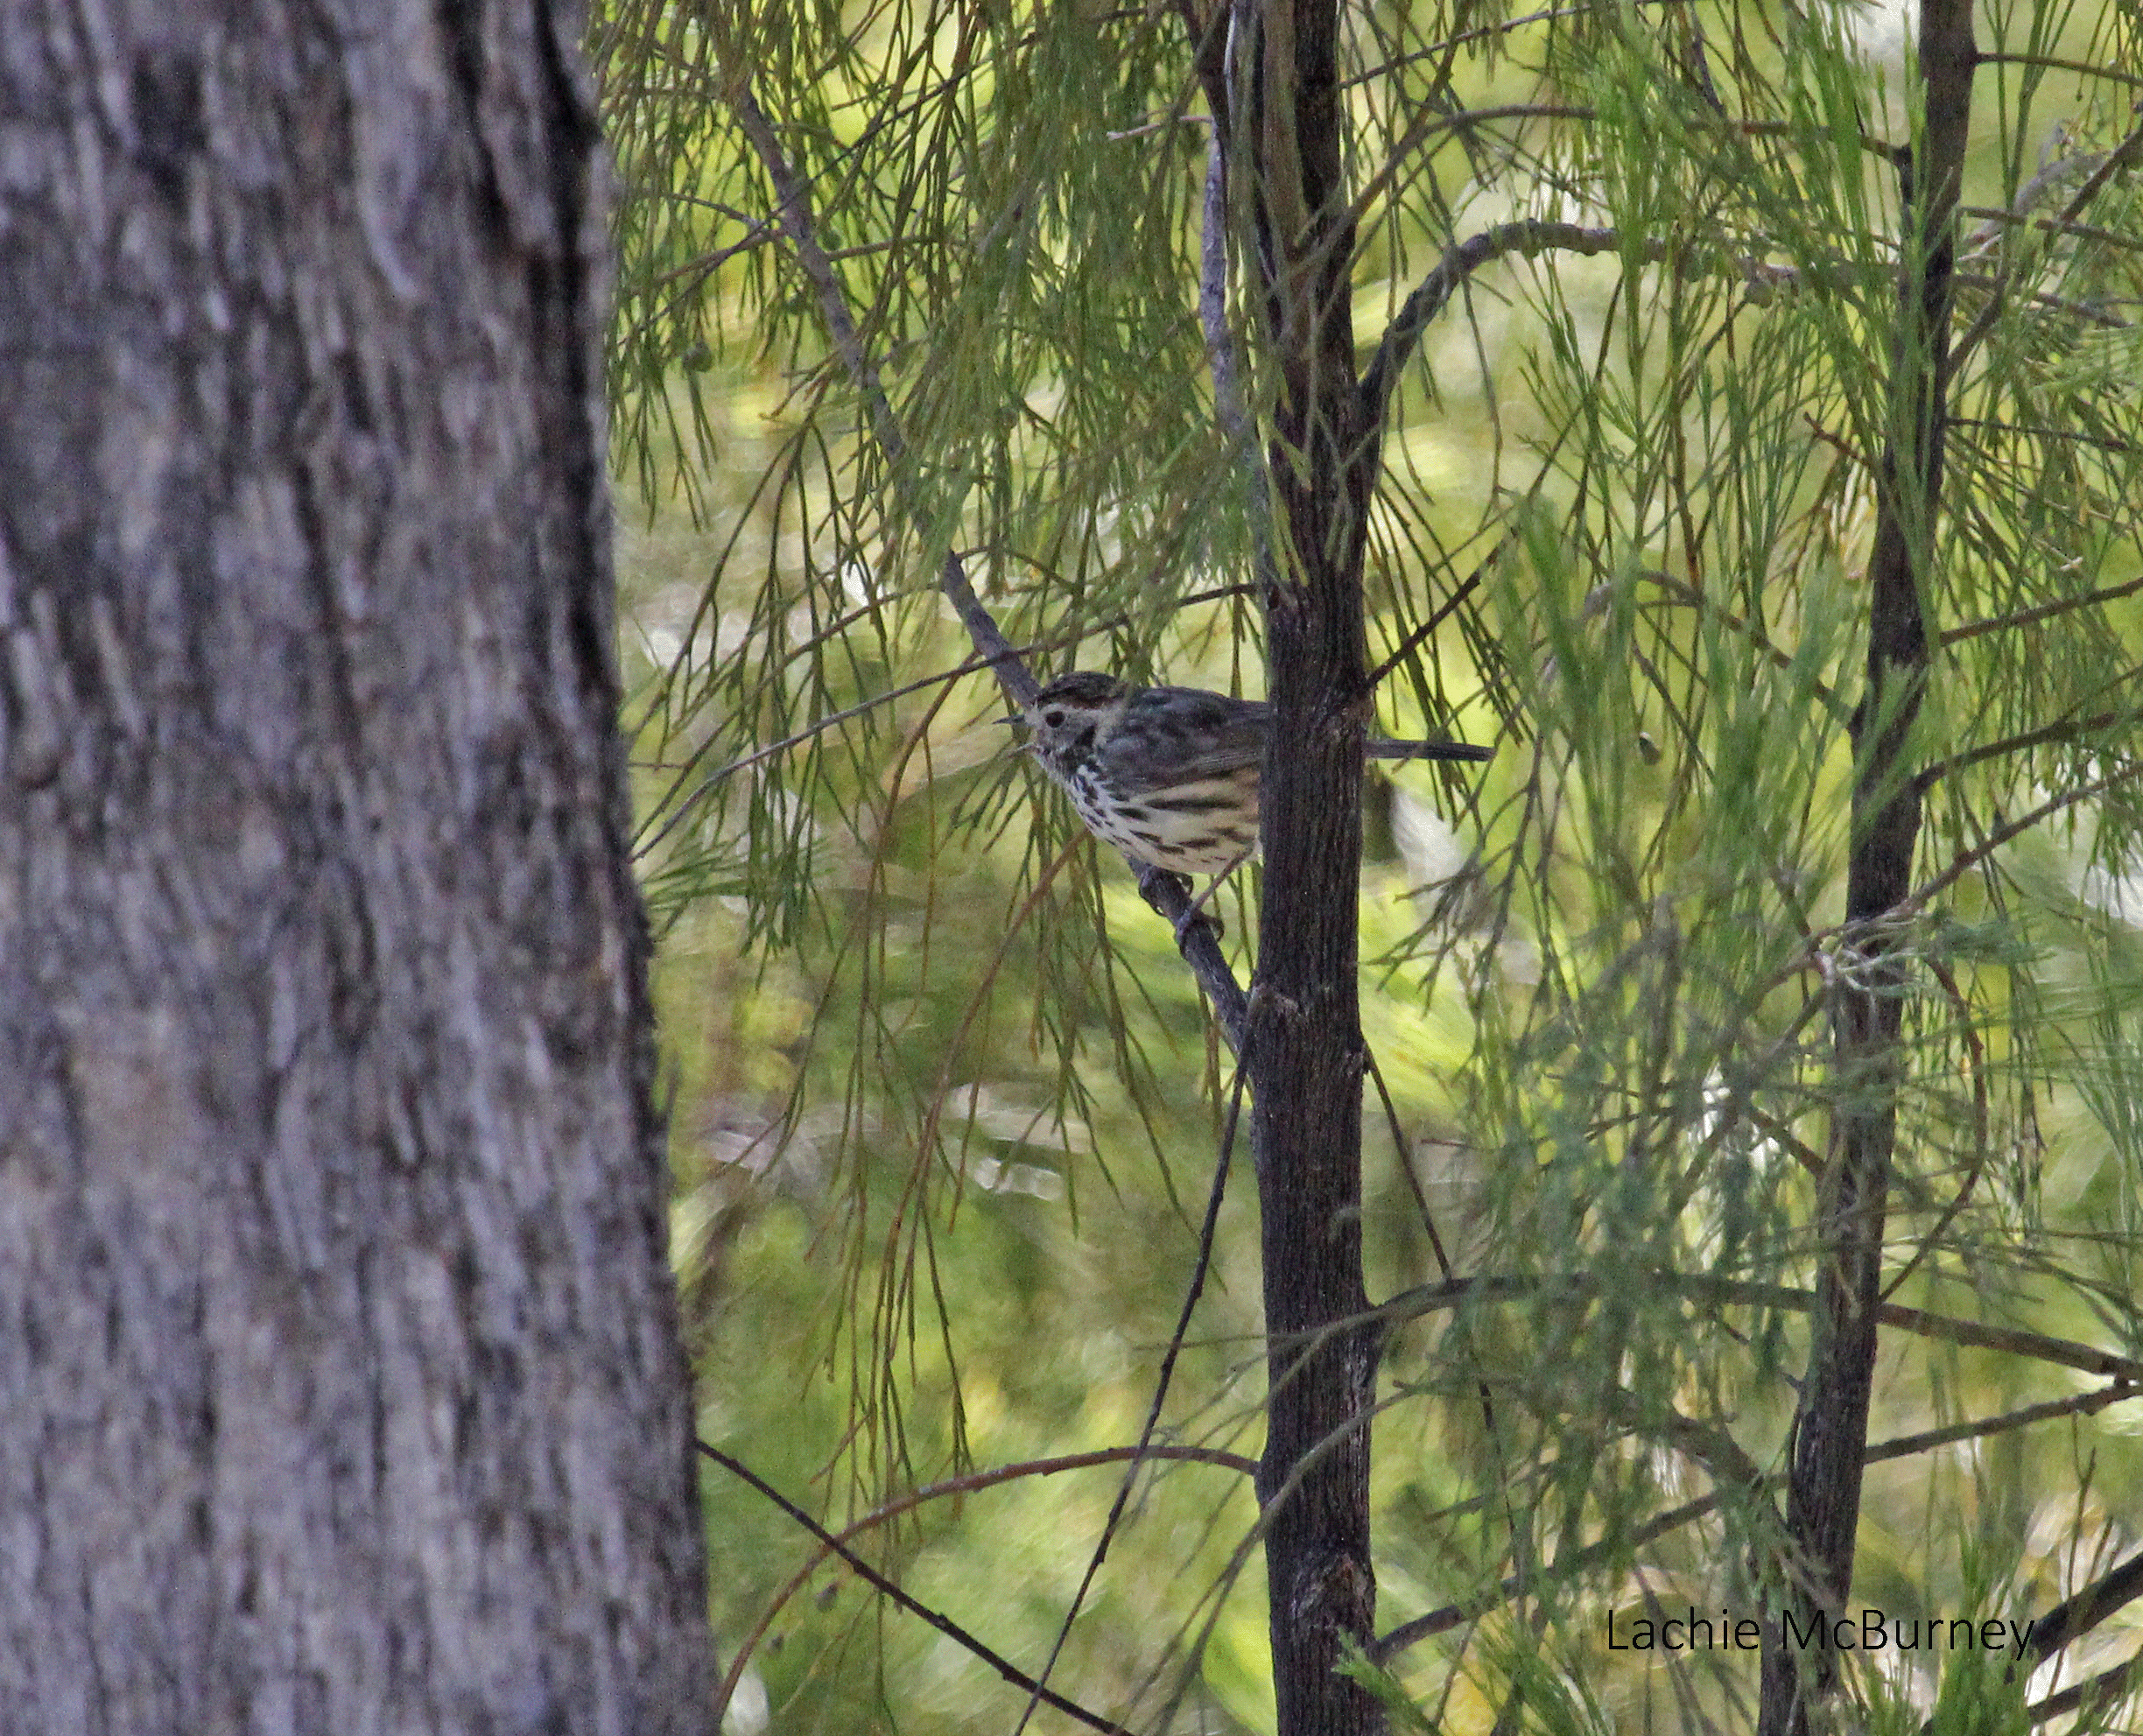   Speckled Warbler doing its raspy alarm call.&nbsp;    Photo: Lachie McBurney.  